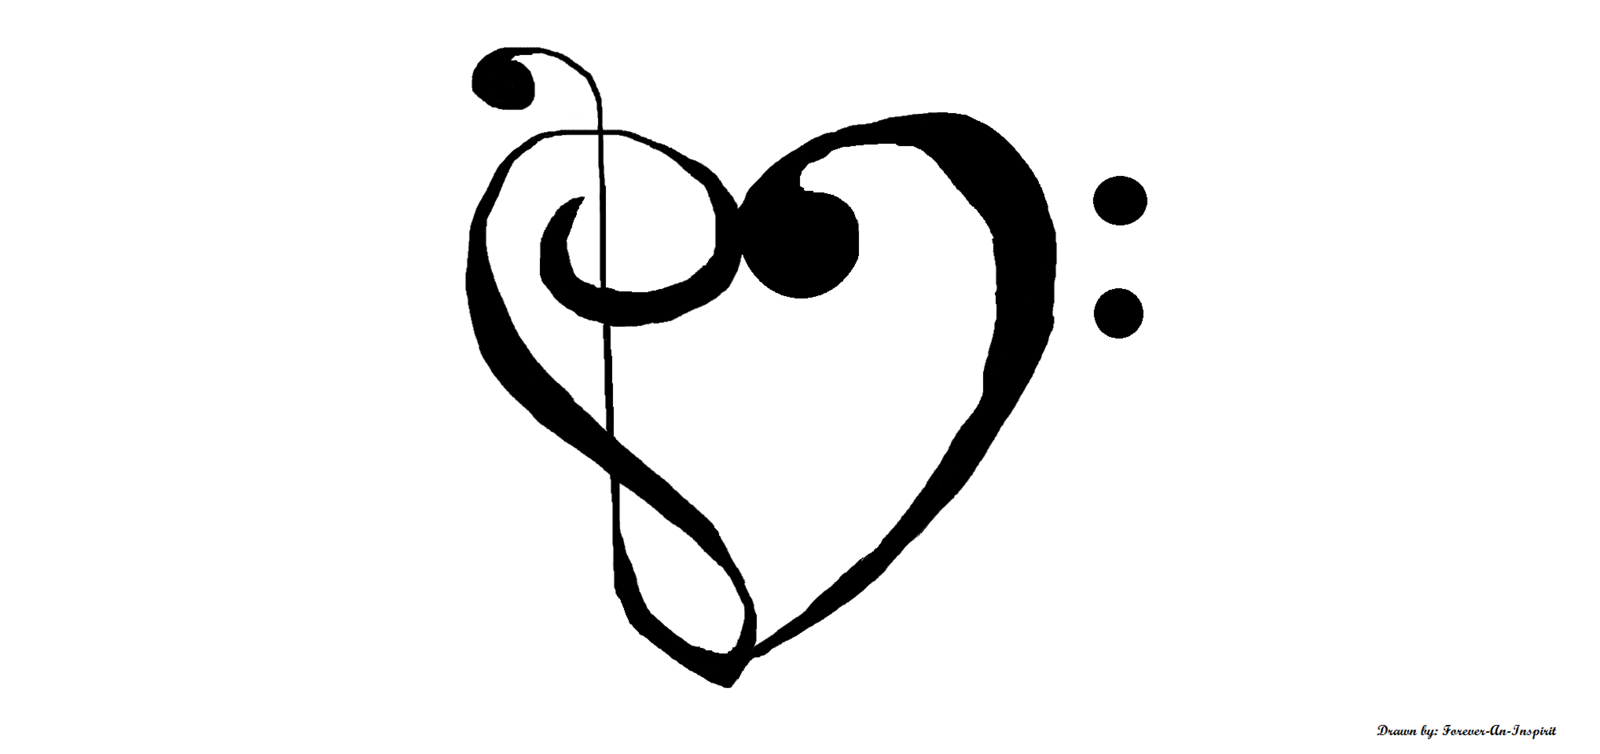 Treble Clef And Bass Clef Heart - ClipArt Best